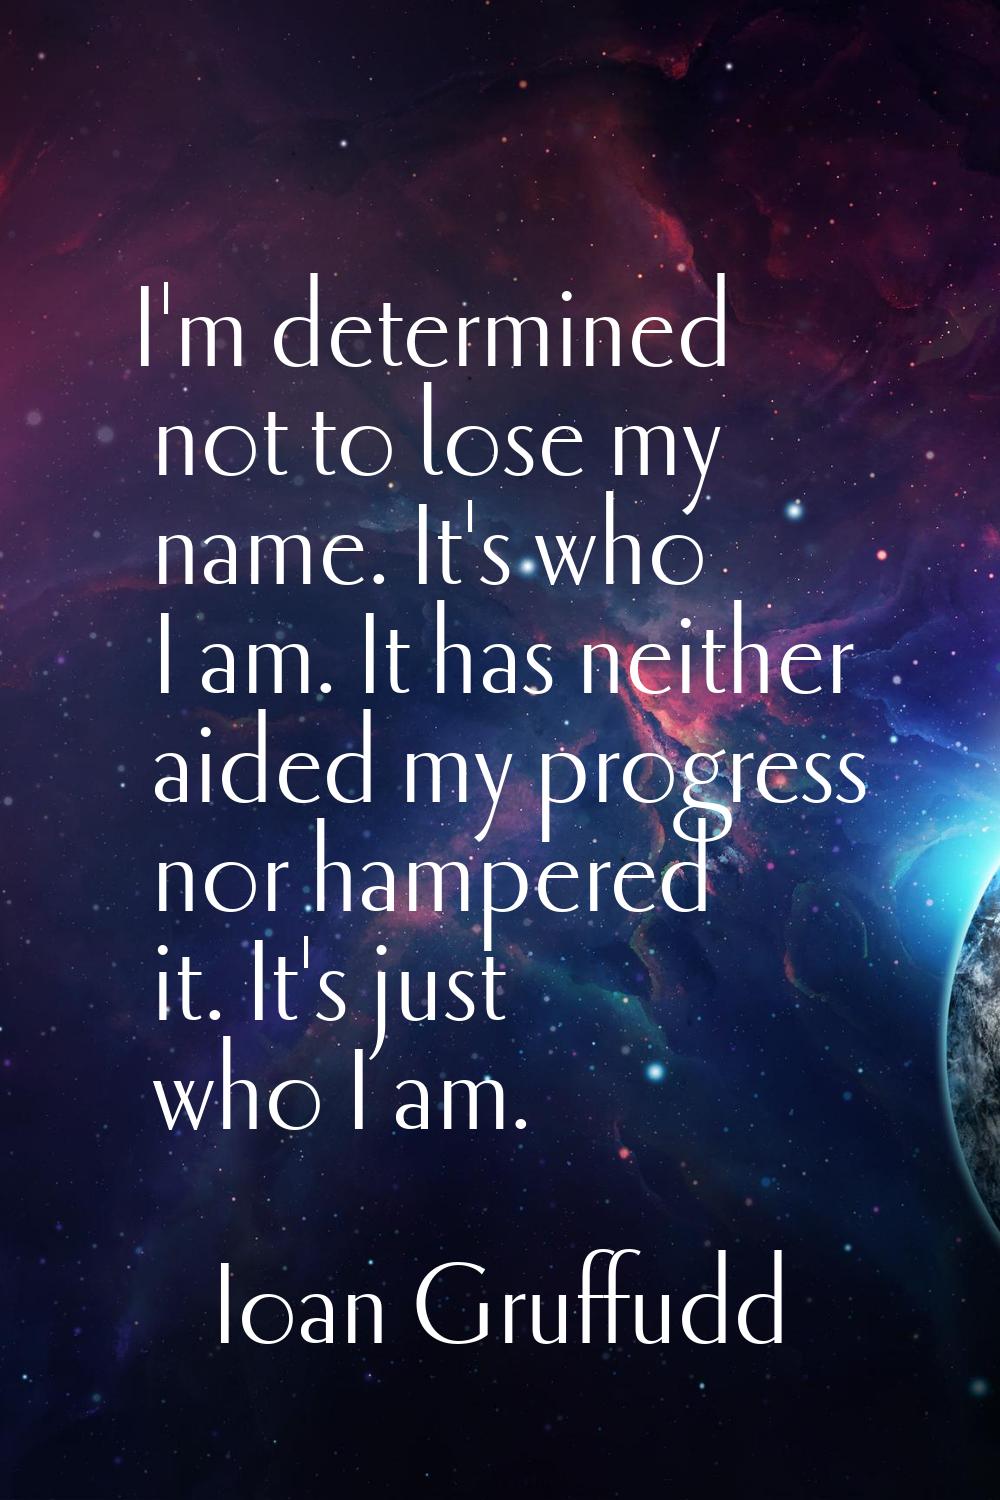 I'm determined not to lose my name. It's who I am. It has neither aided my progress nor hampered it